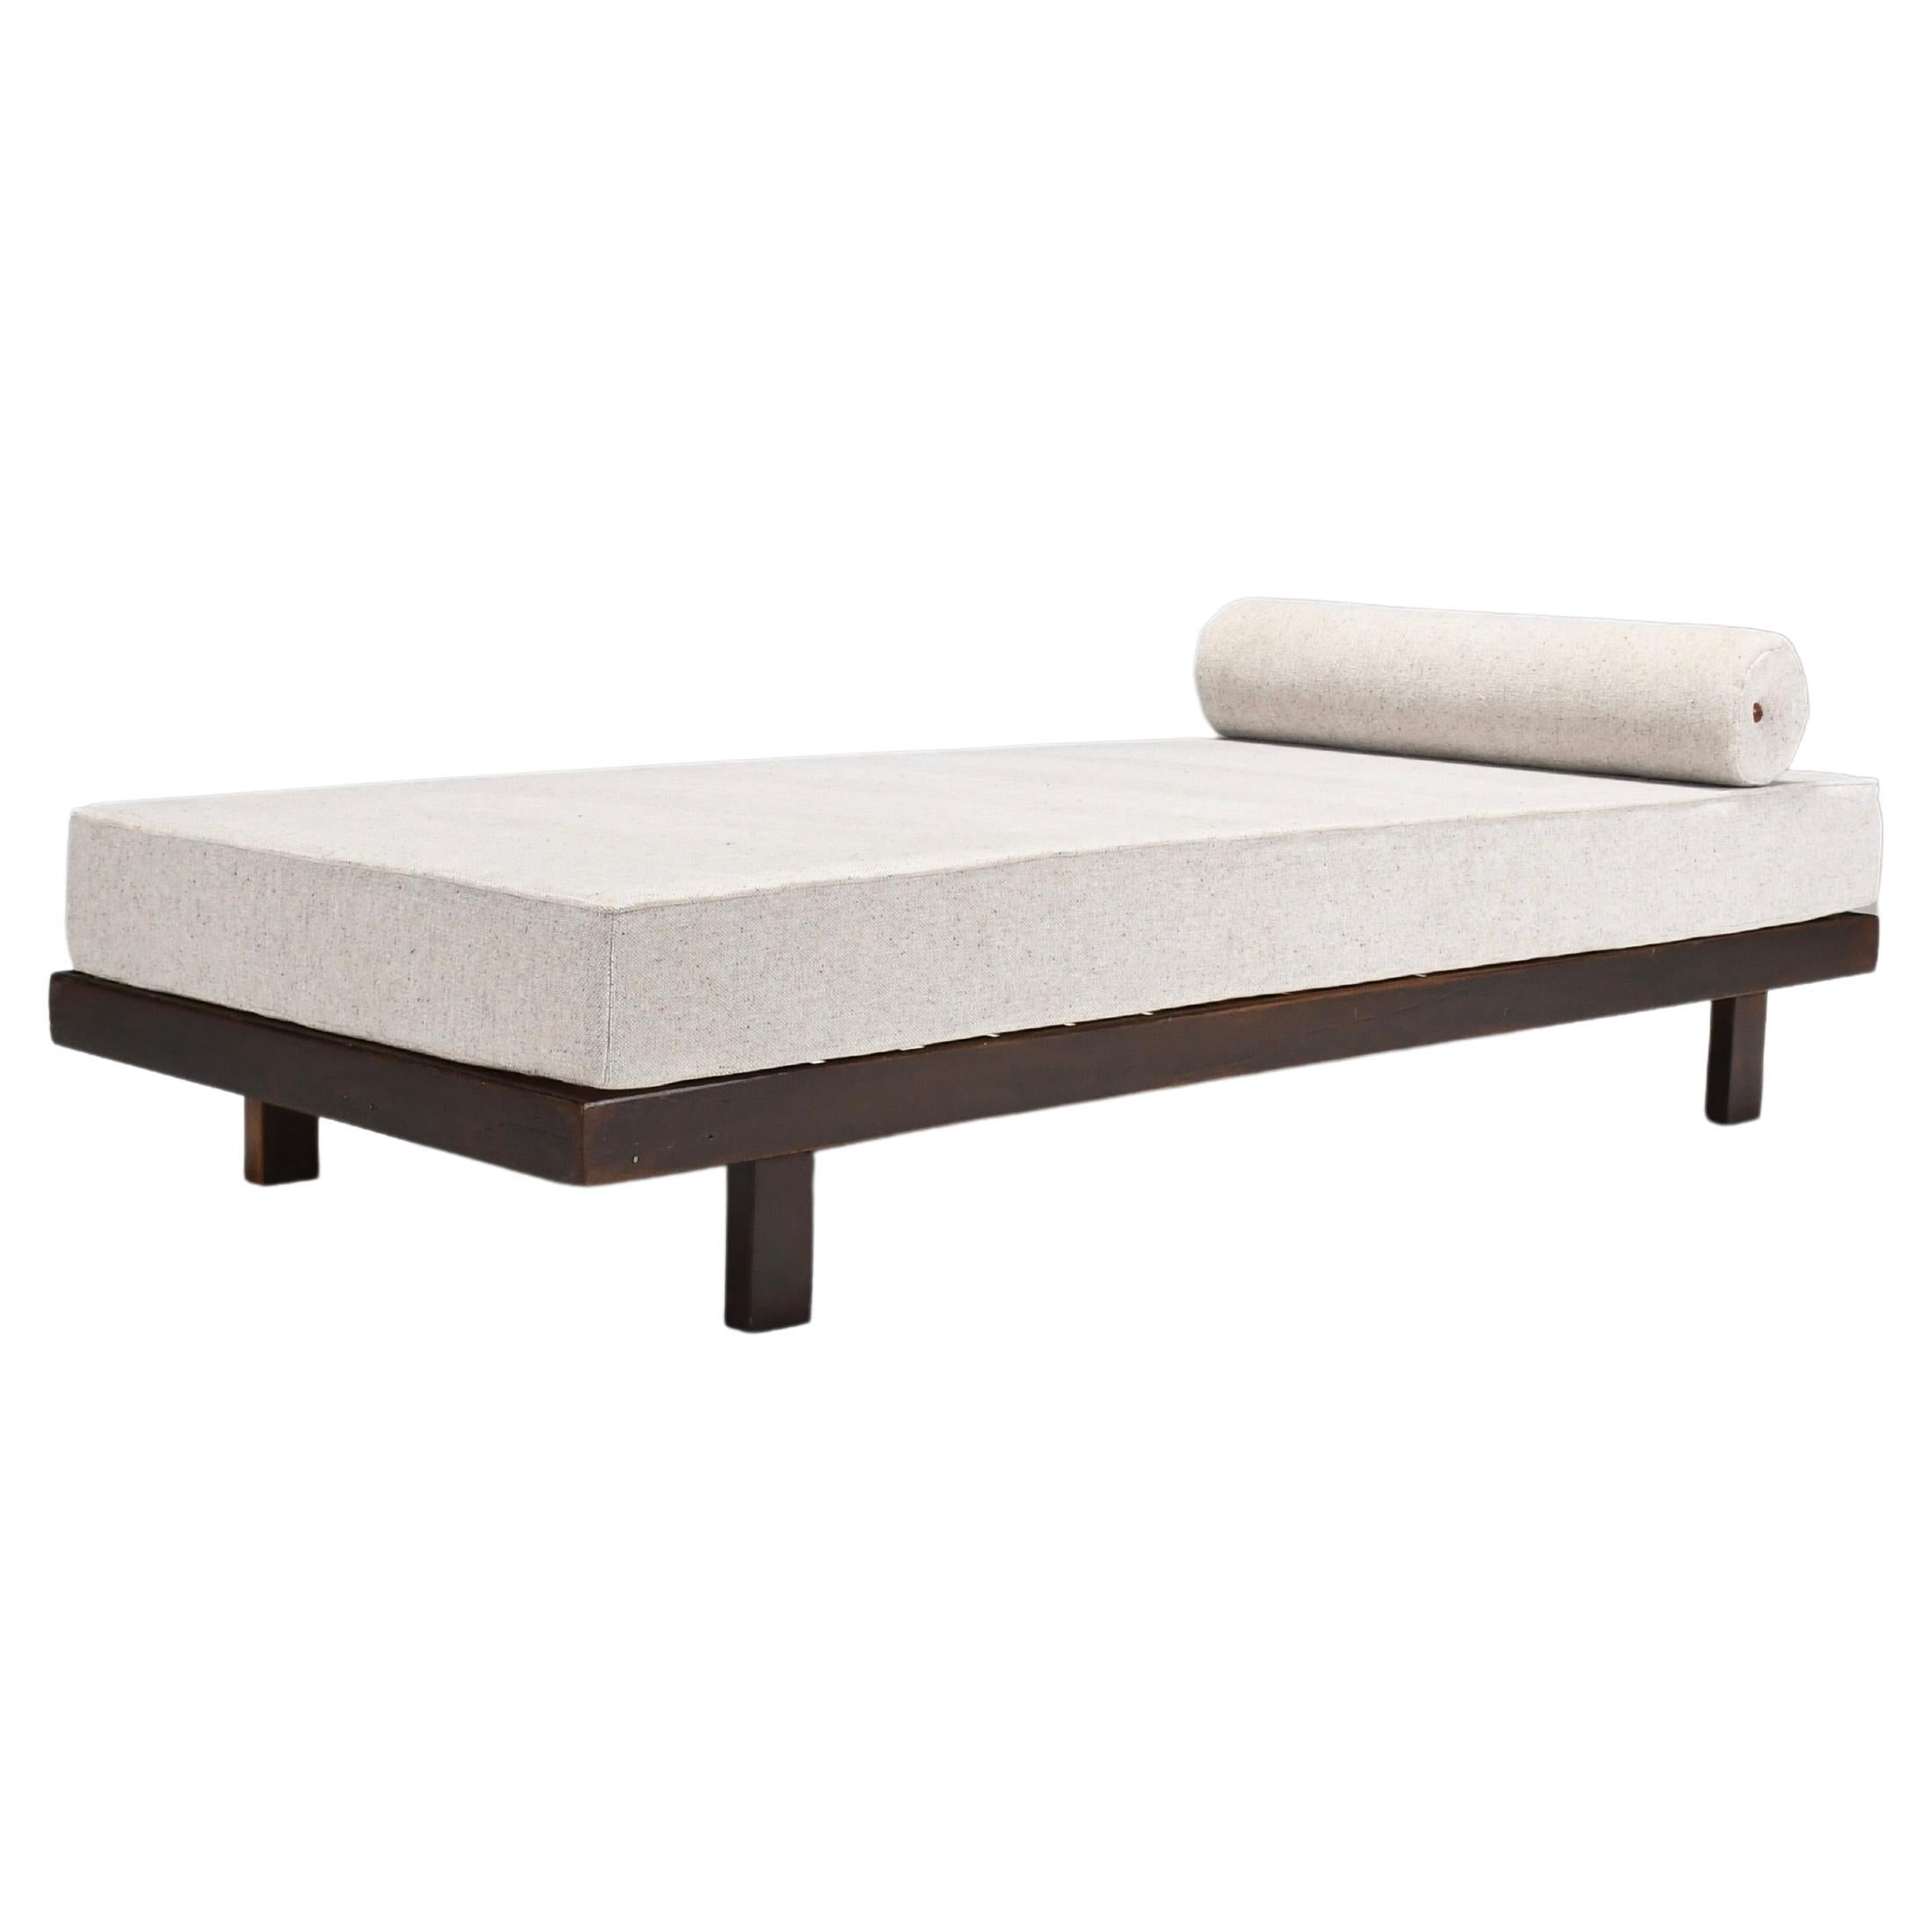 Minimalist Daybed by Jorge Zalszupin for L’atelier, Brazil, 1959 '2 Available' For Sale